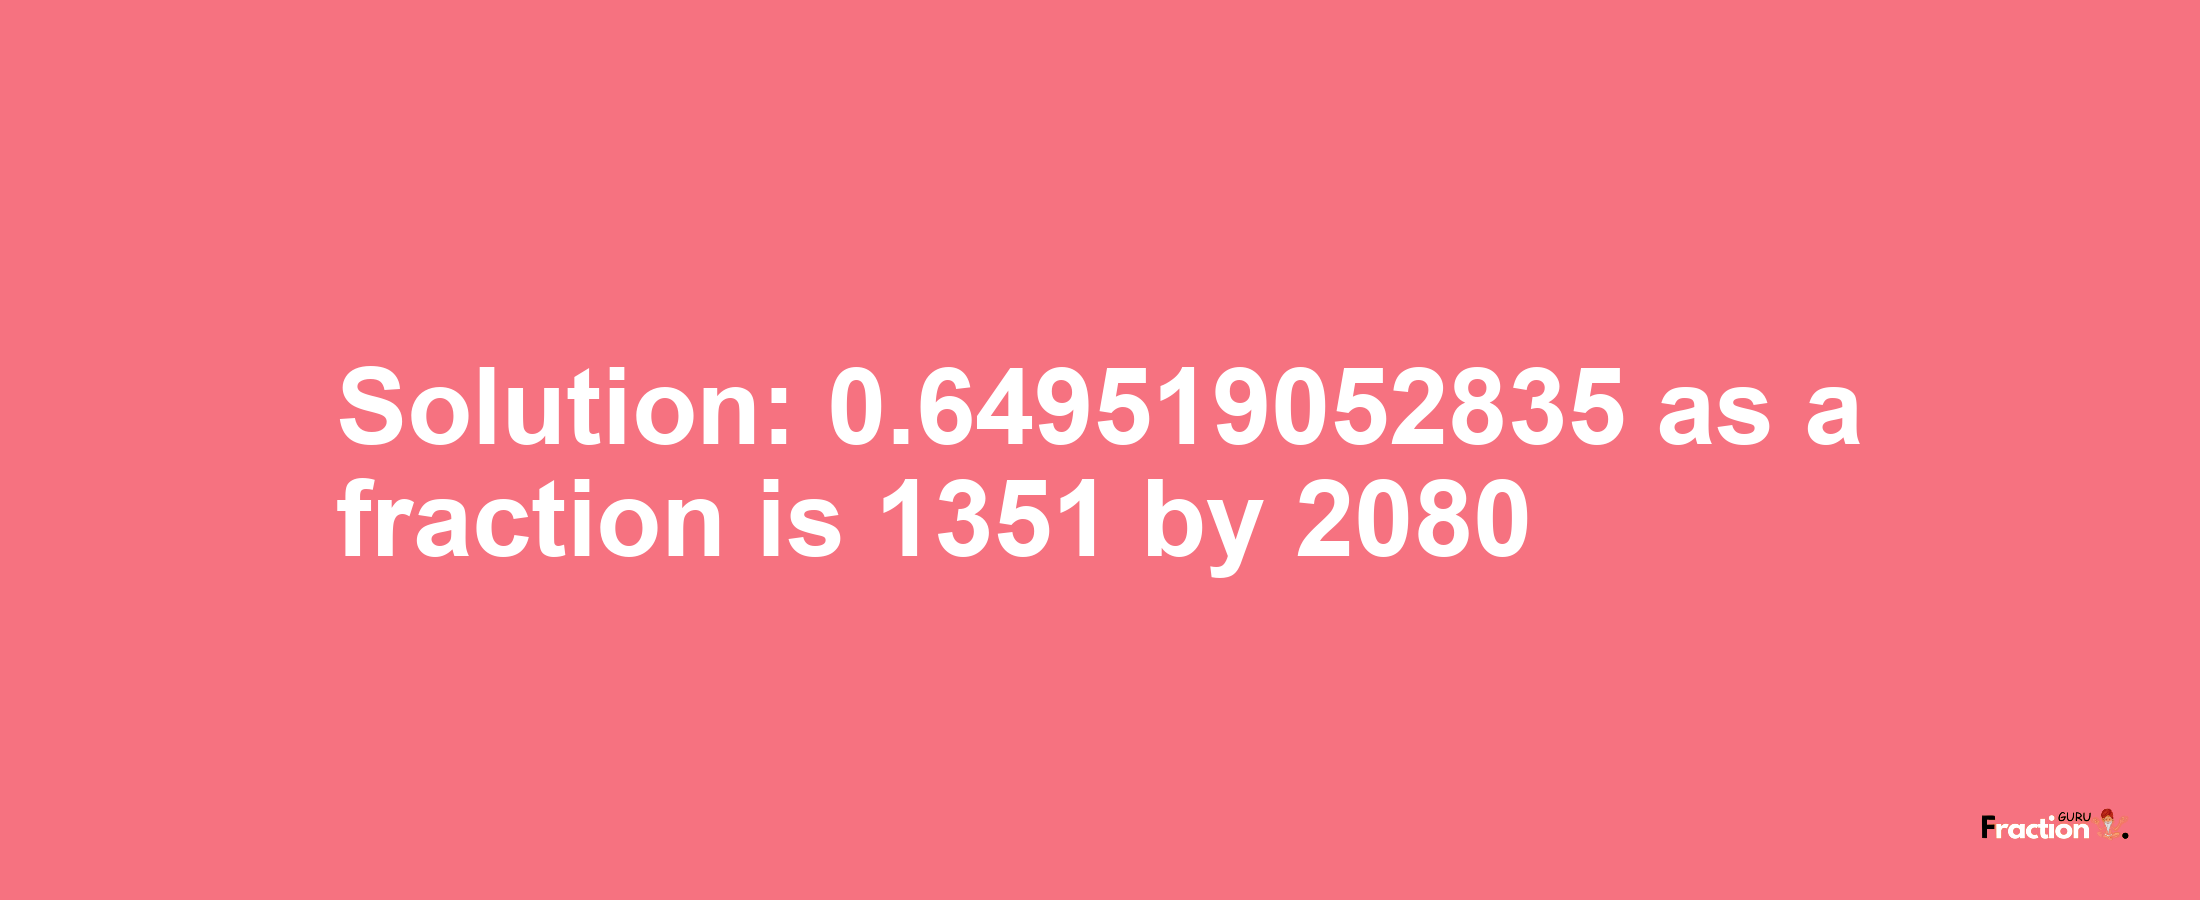 Solution:0.649519052835 as a fraction is 1351/2080